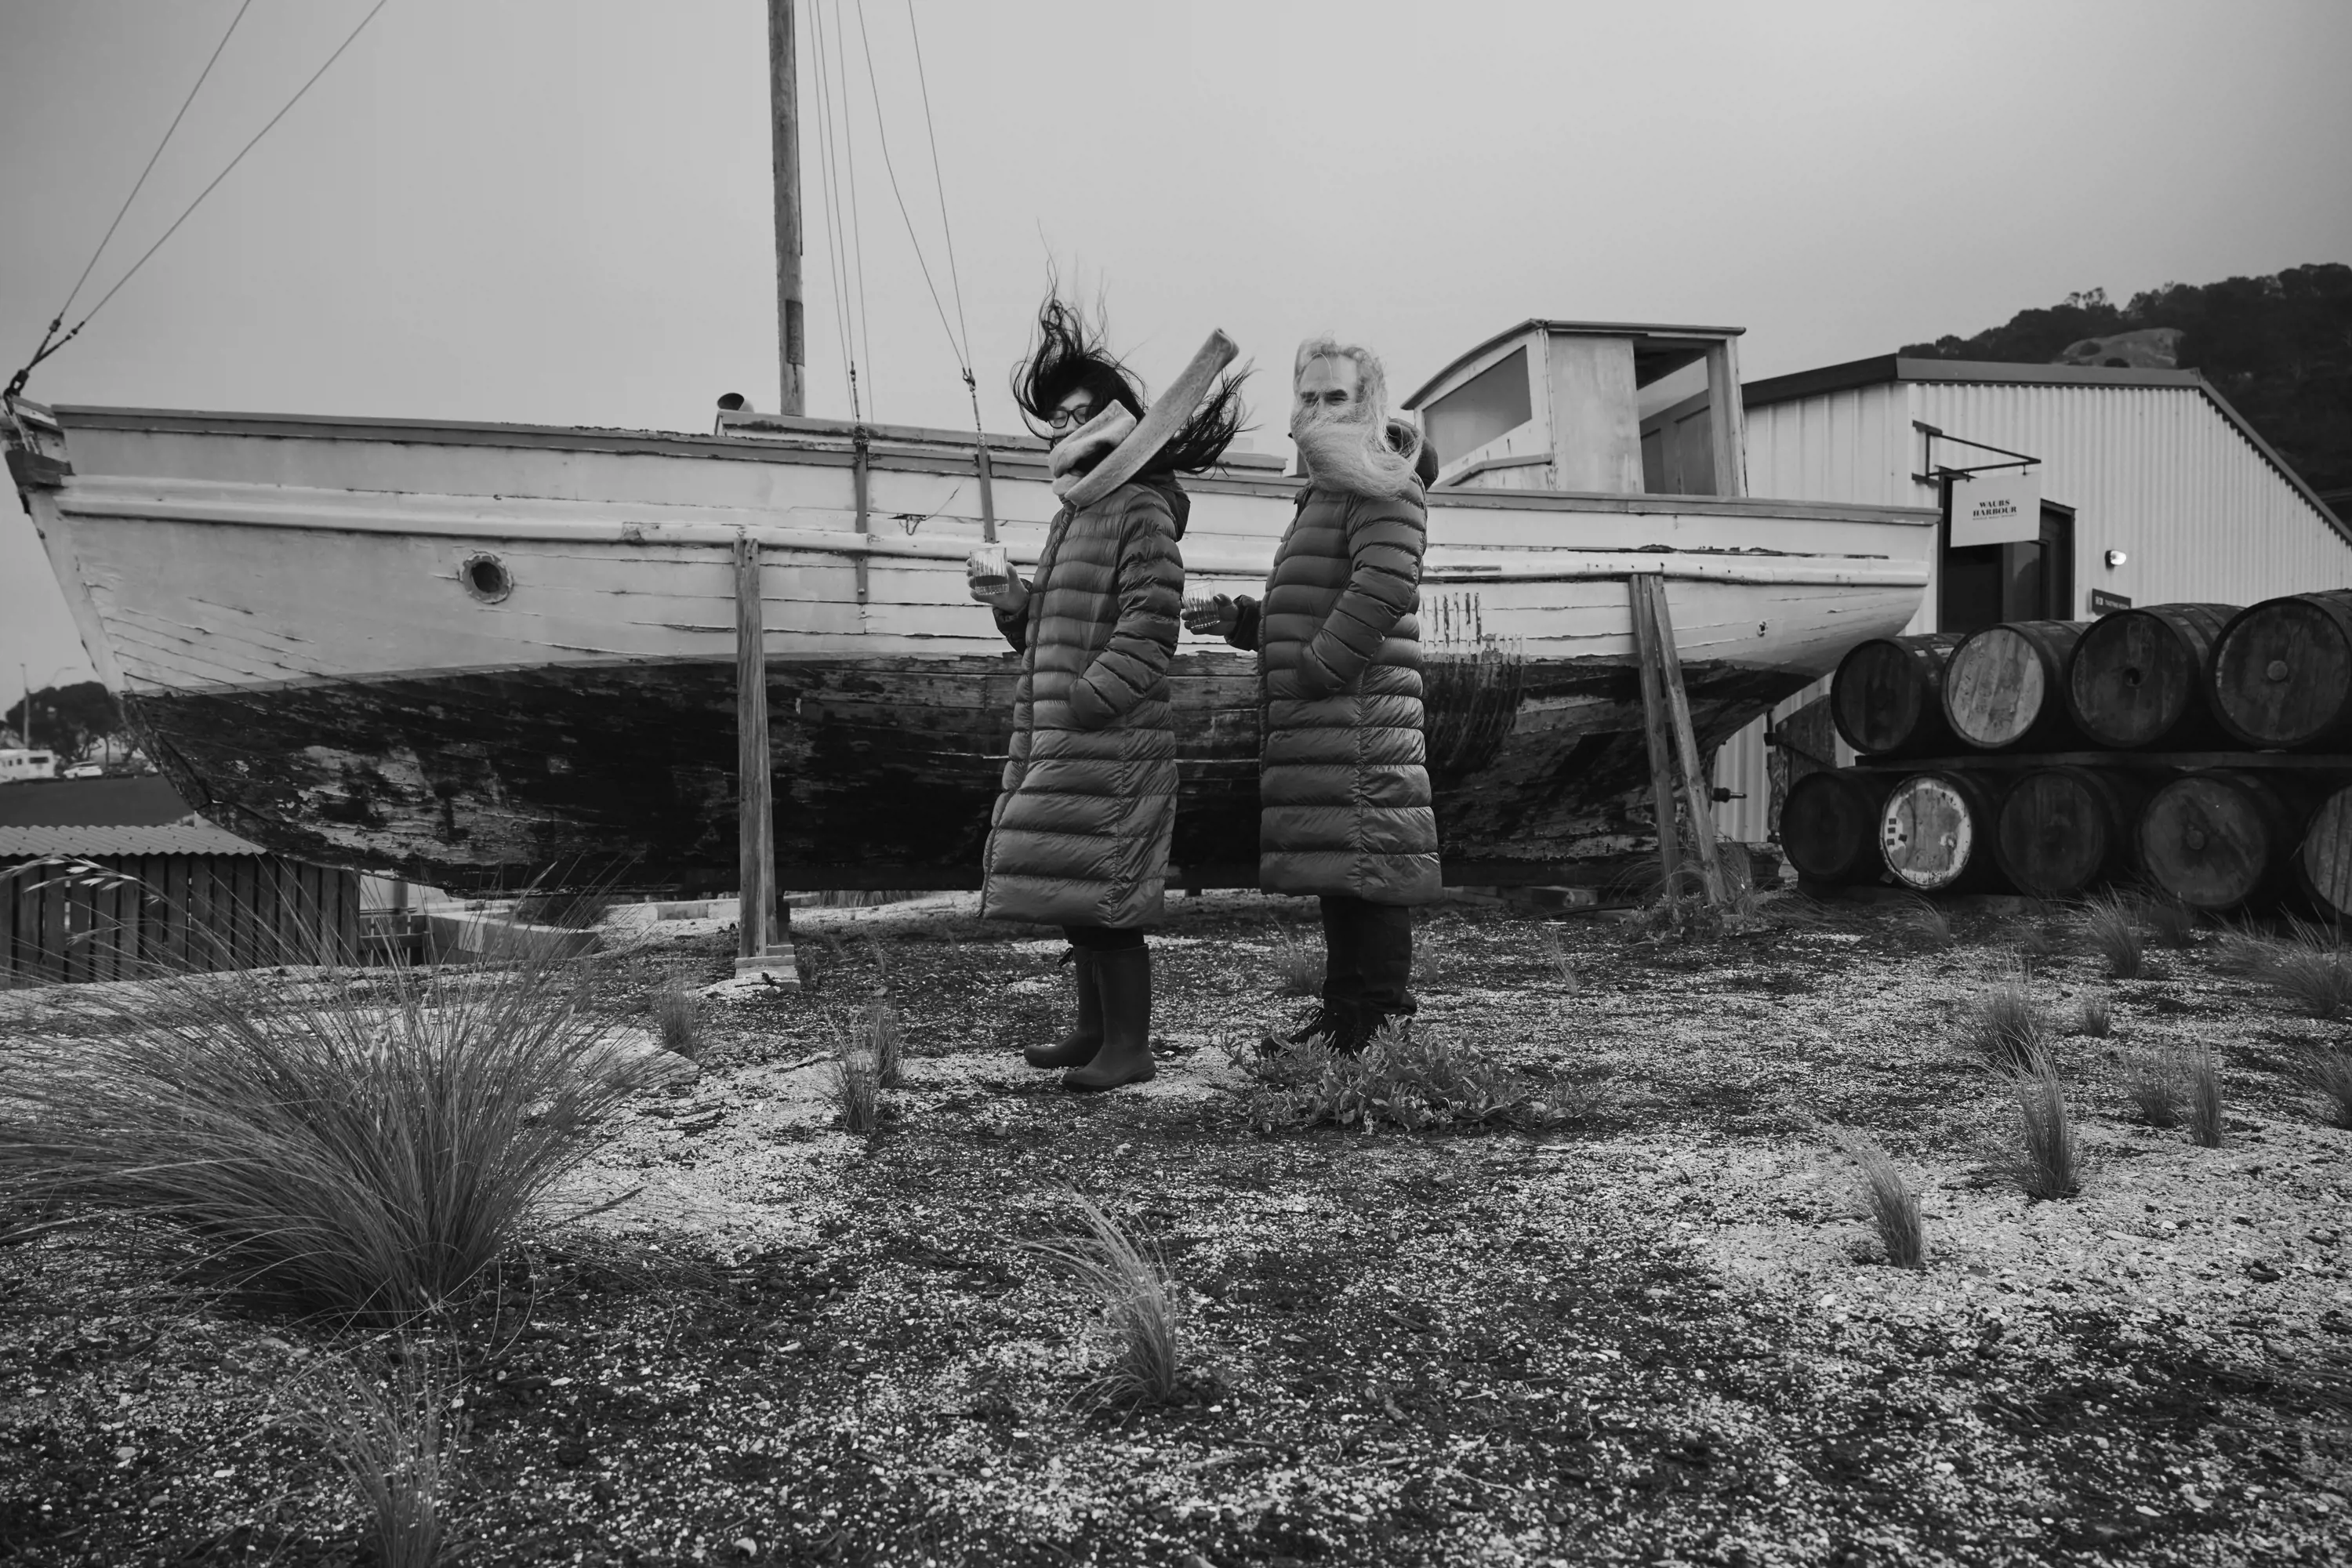 Two people wearing body-length puffer jackets stand in front of a large wooden boat up on stilts near water.